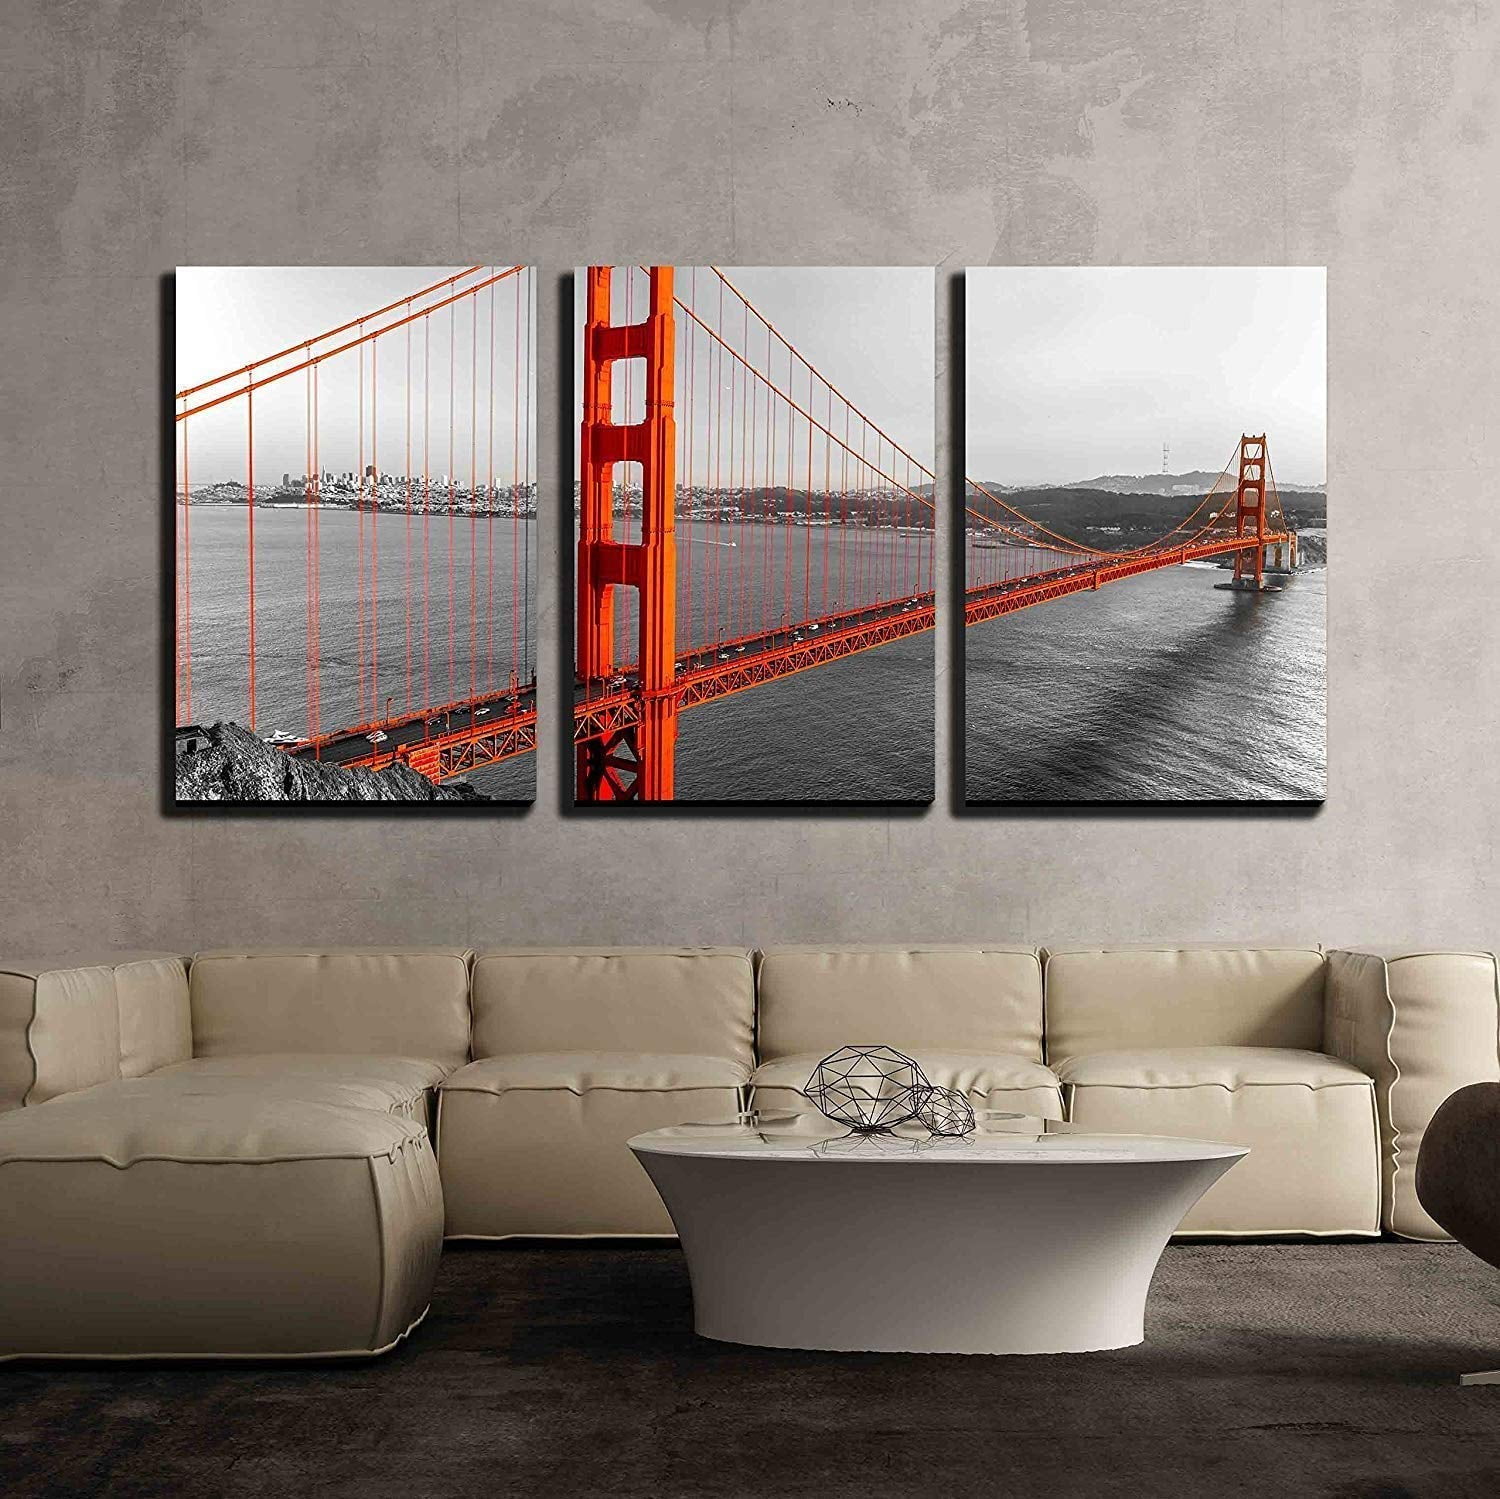 wall26 Canvas Print Wall Art Set Red Golden Gate Bridge in San Francisco  Nature Wilderness Photography Realism Rustic Scenic Relax/Calm for Living  Room, Bedroom, Office 24quot;x36quot;x3 PanelsPa